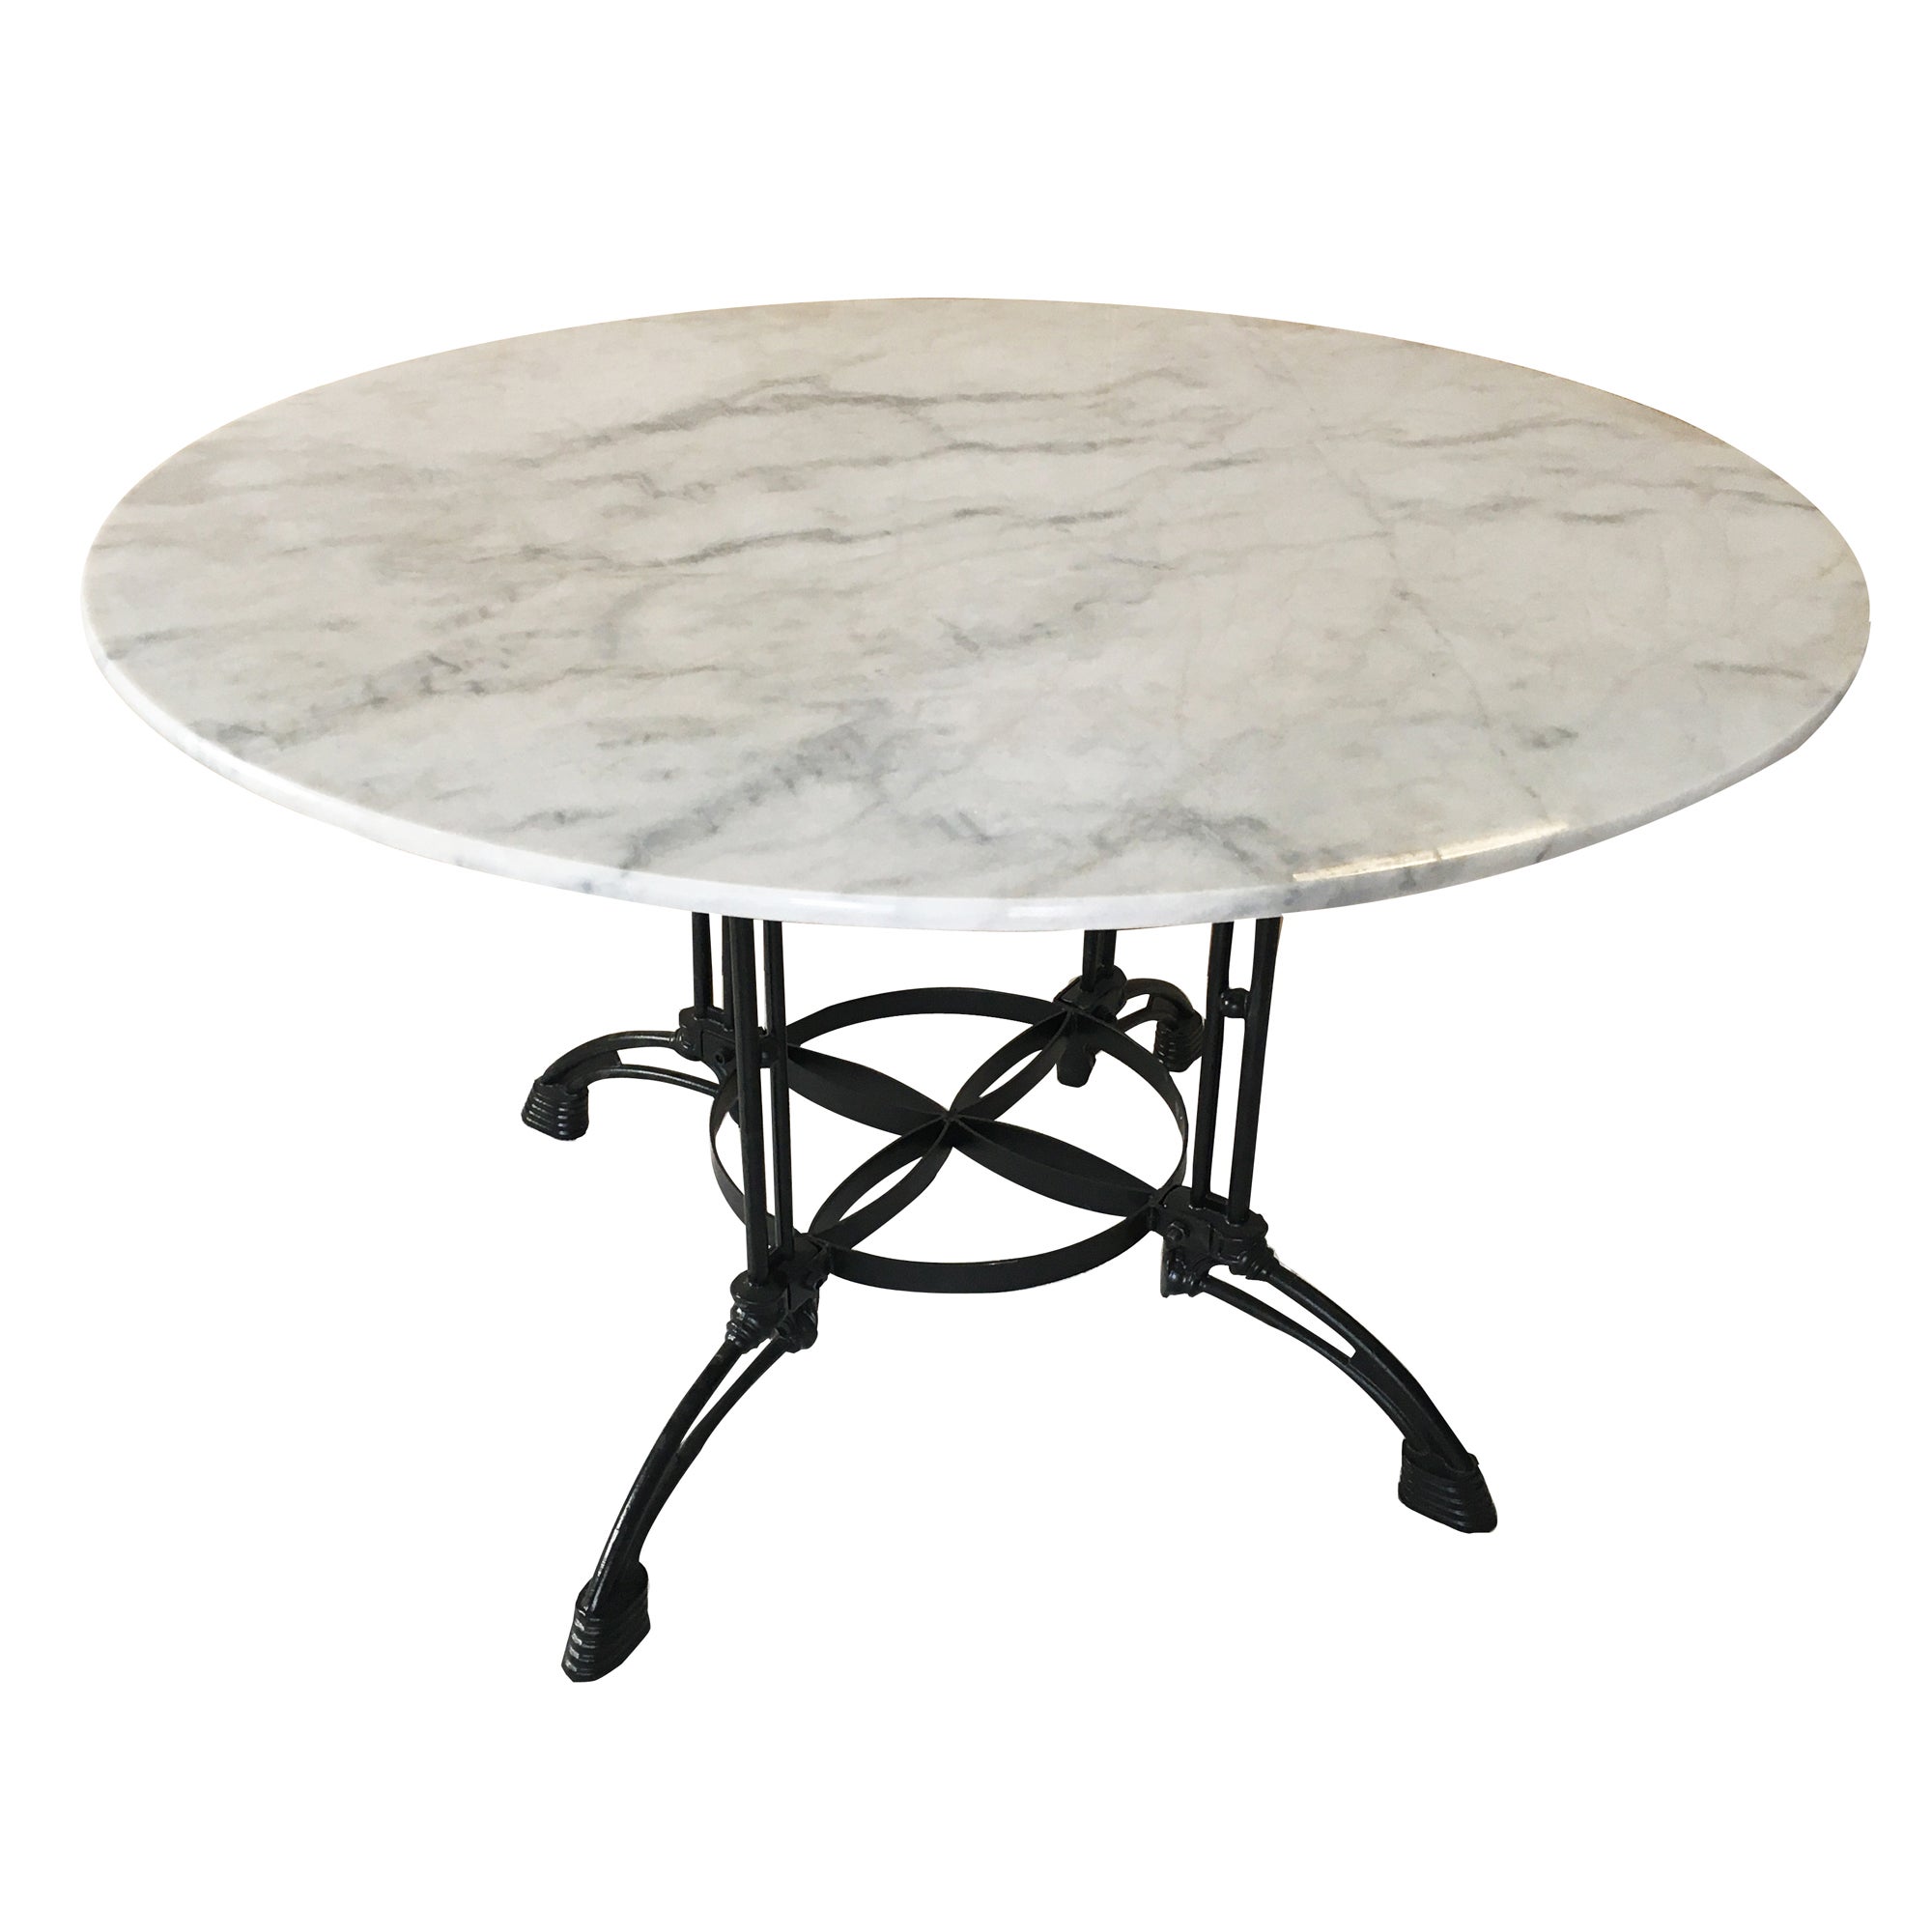 120cm Round Dining Table with White Marble Top